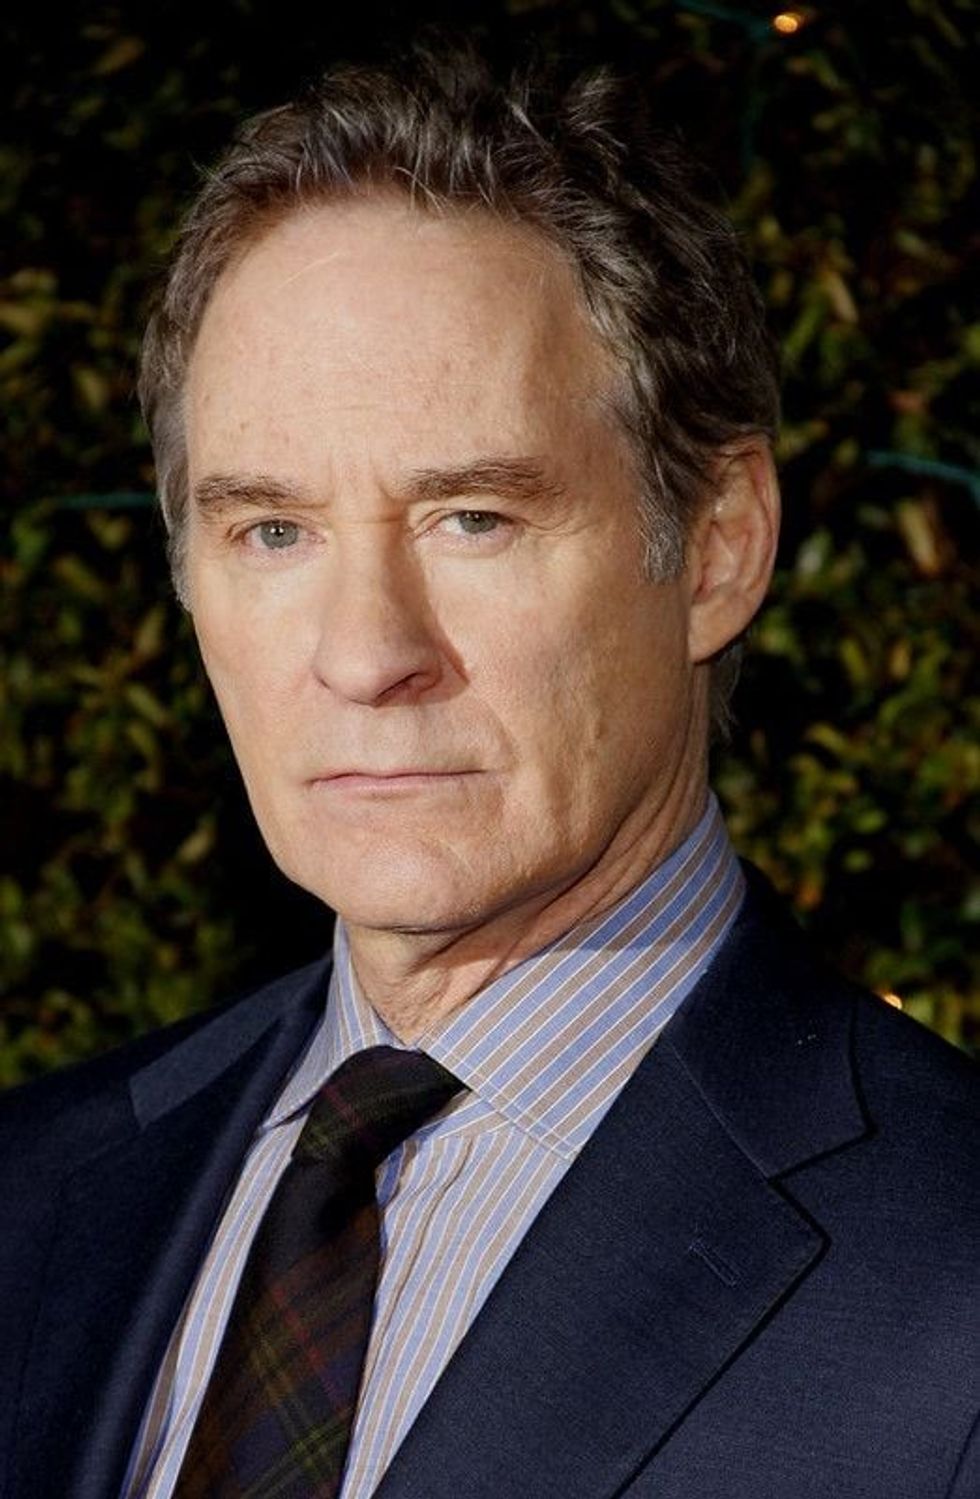 Kevin Kline formed the city center acting company along with his Julliard Graduates Patti LuPone and David Ogden Stiers' under the aegis of John Houseman